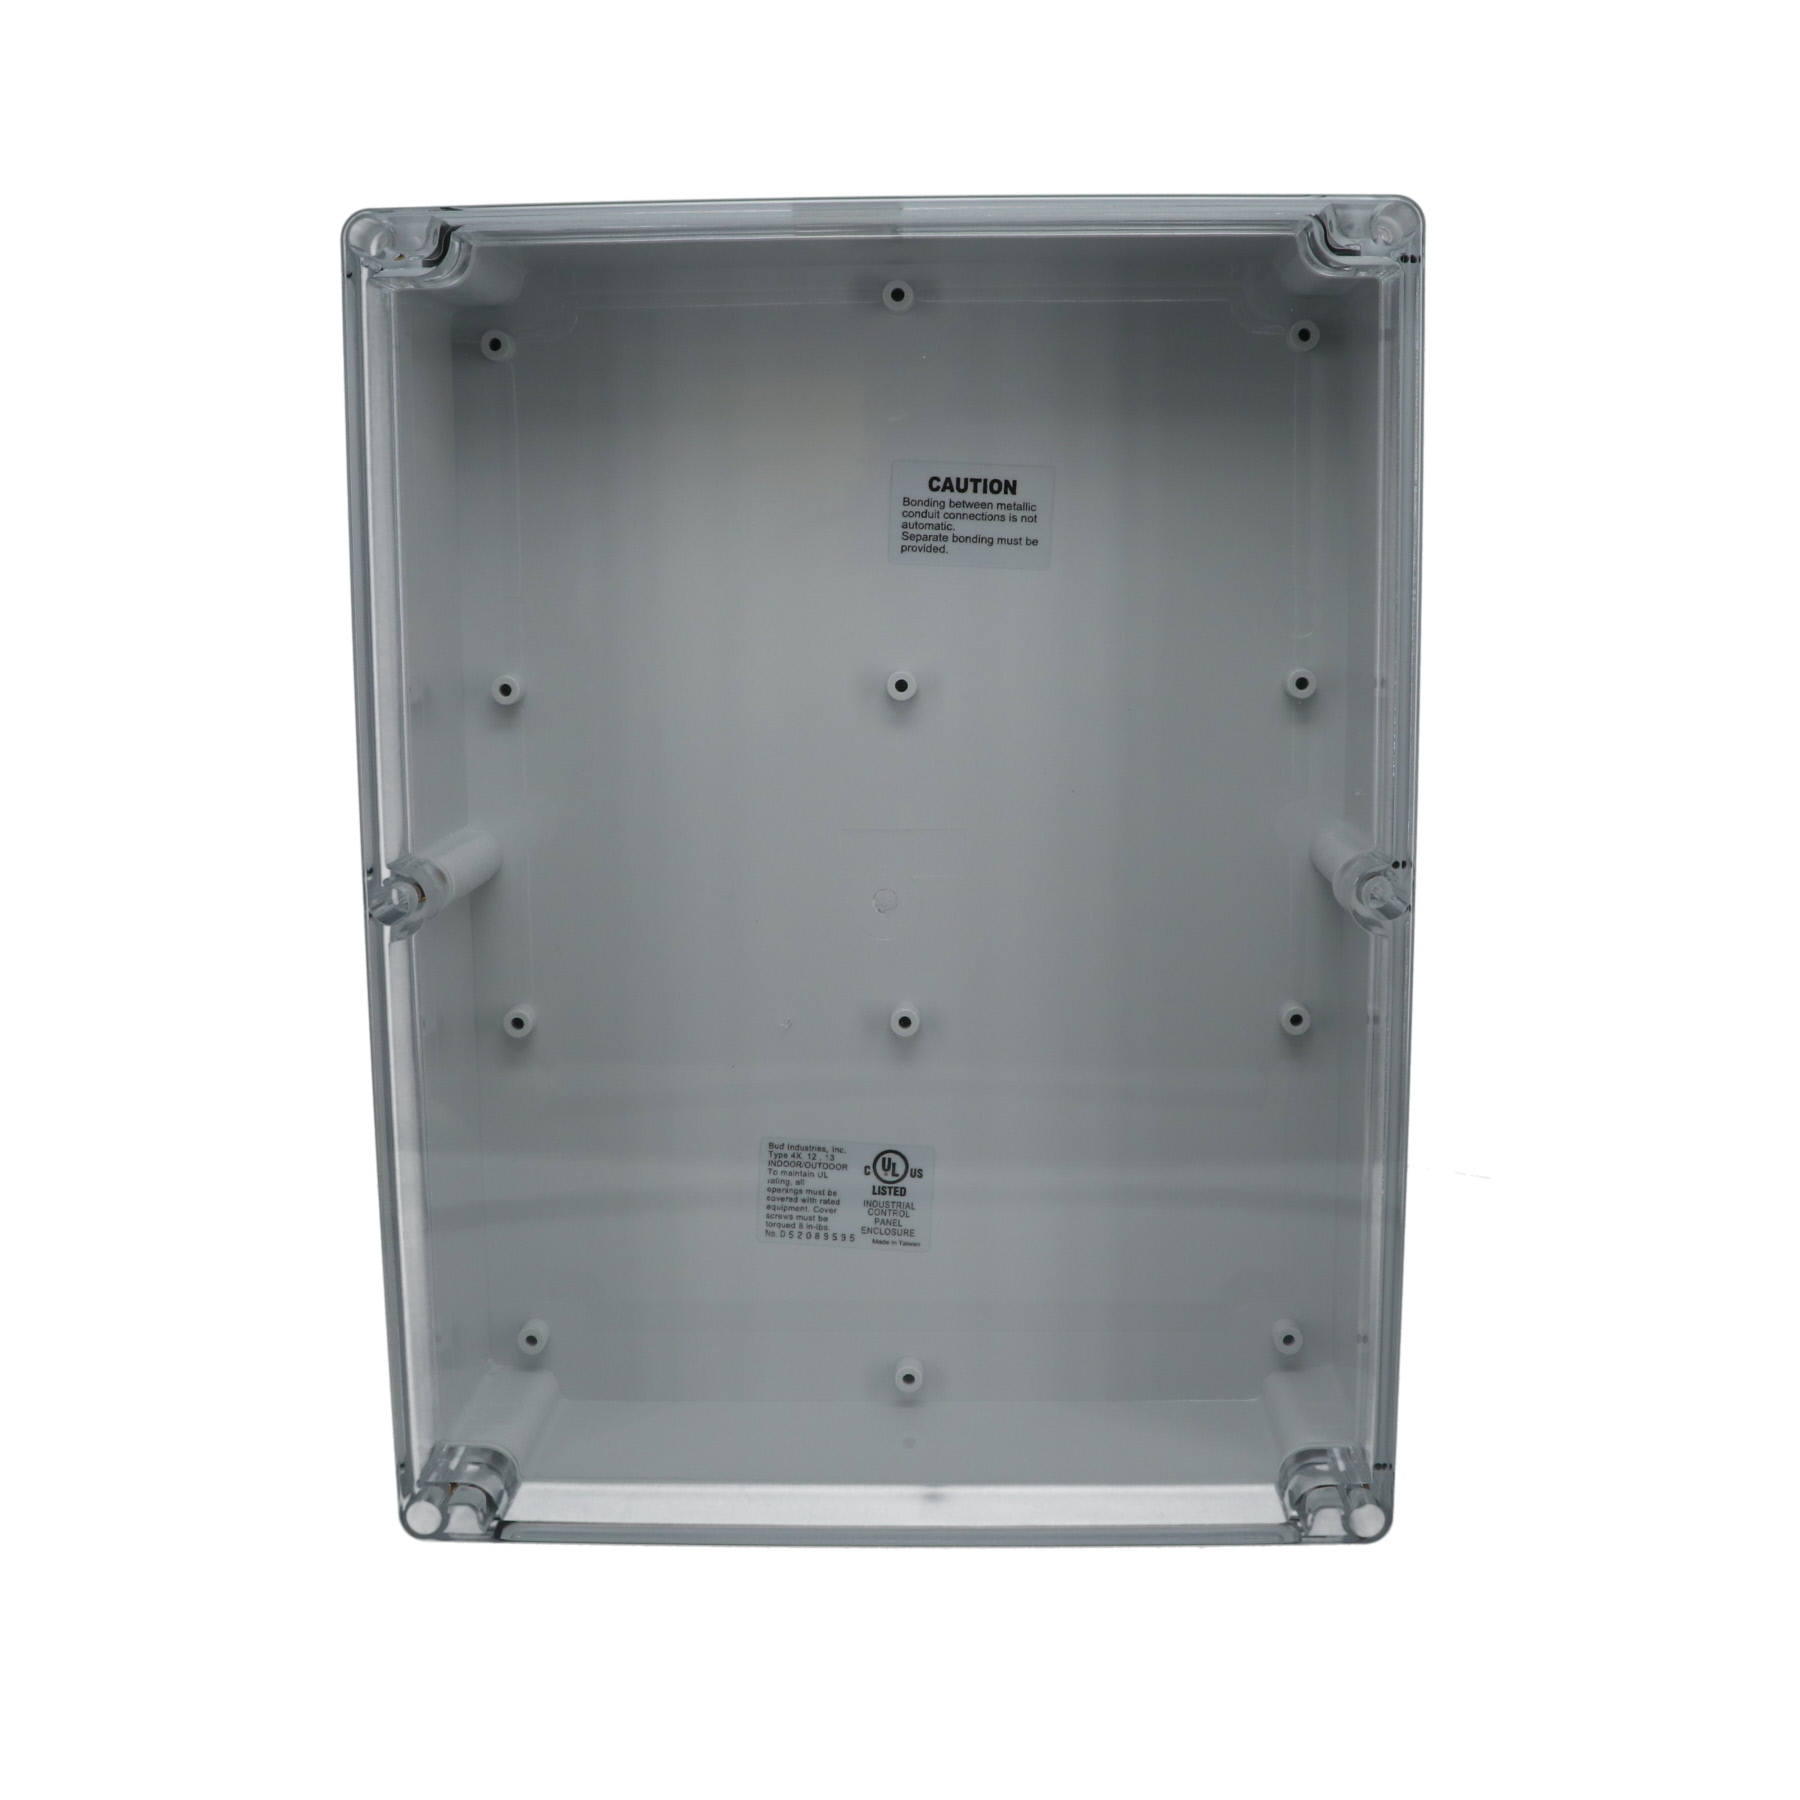 IP65 NEMA 4X Box with Clear Cover PN-1342-C